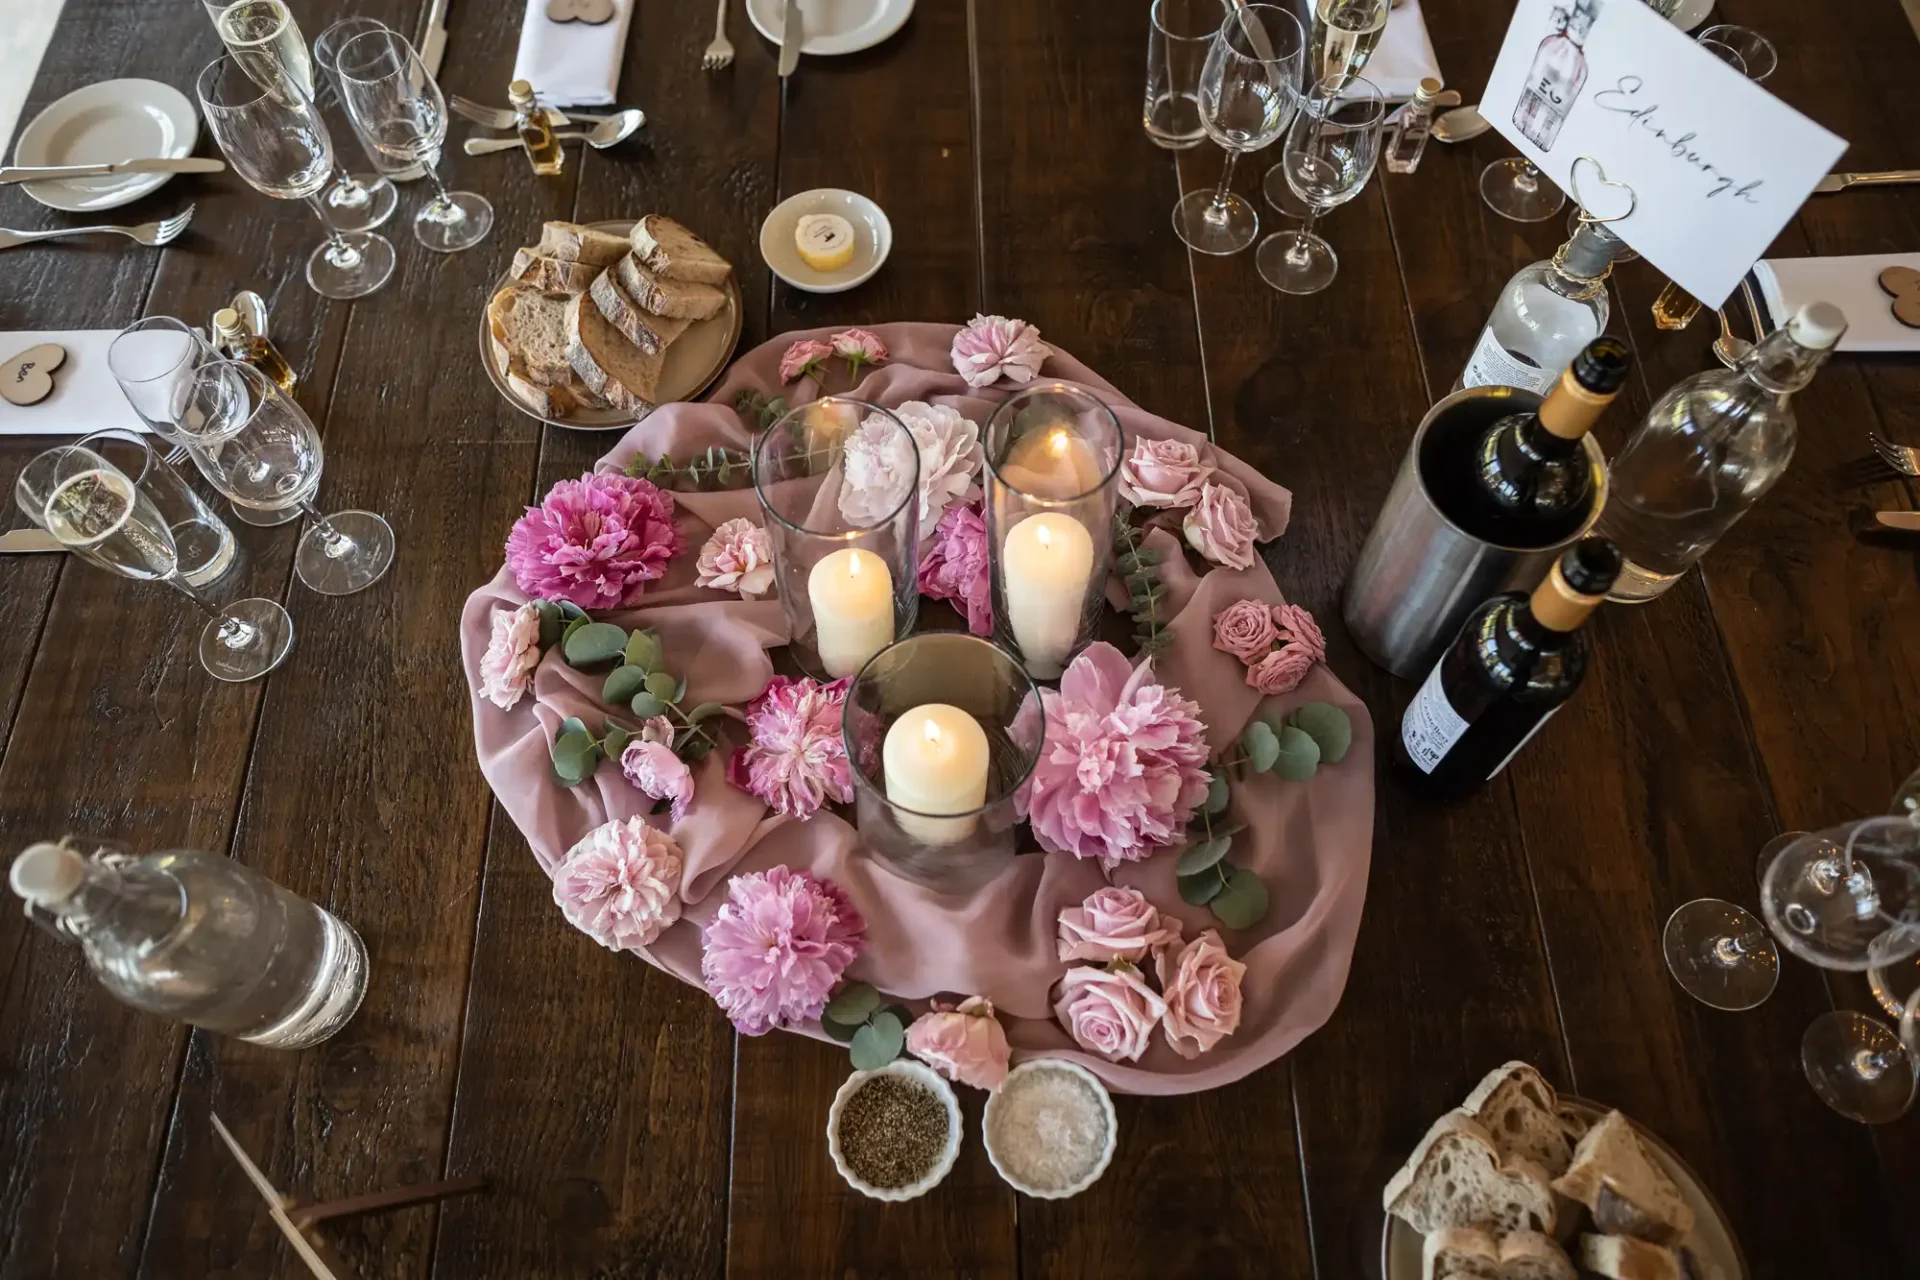 Elegant dining table setup with pink floral centerpieces, candles, wine bottles, and filled glasses on a rustic wooden surface.